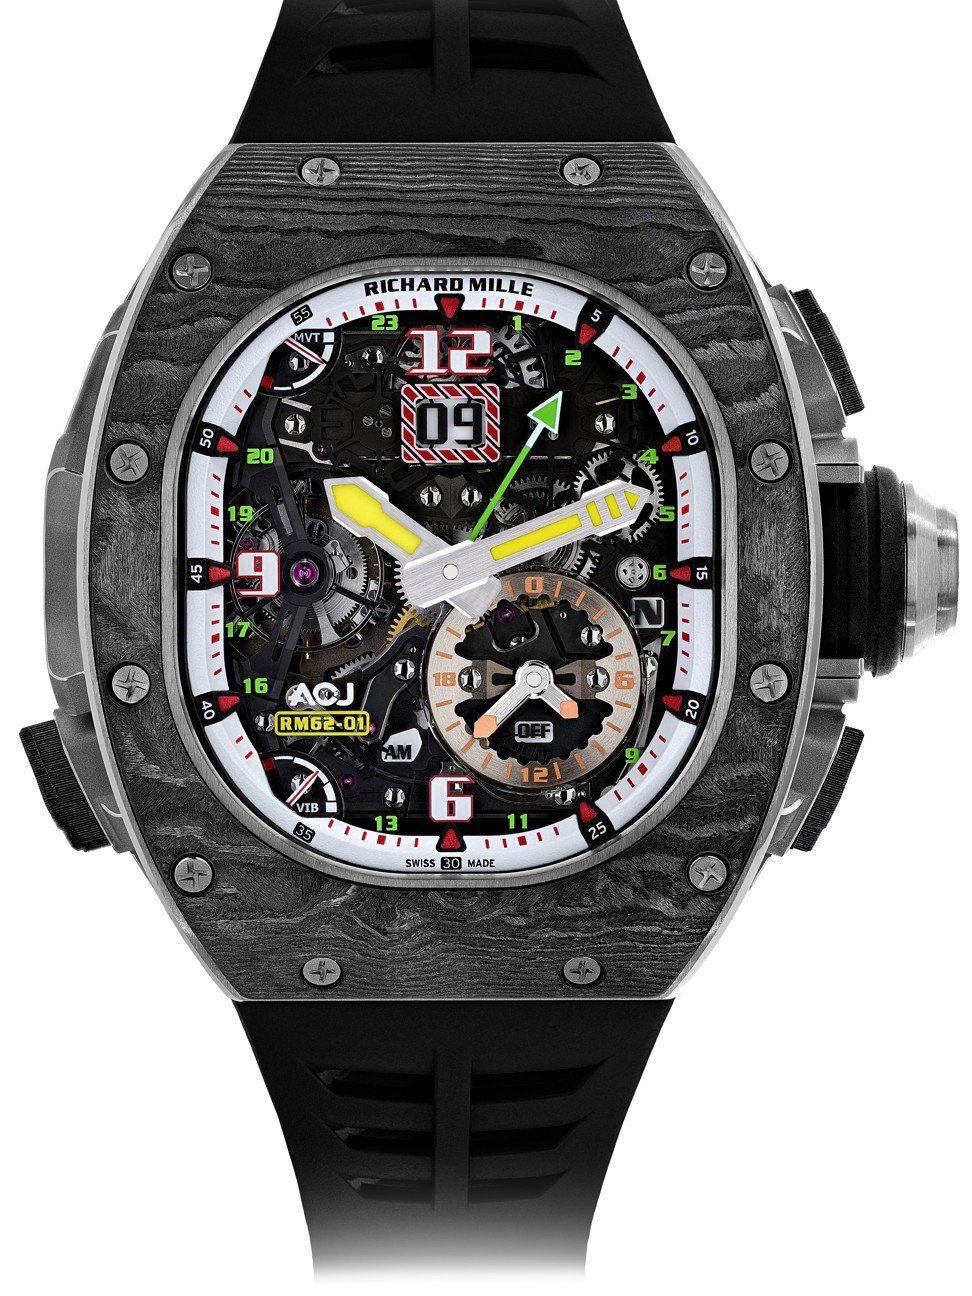 Richard Mille’s RM 62-01 Tourbillon Vibrating AJC is an alarm watch designed to give a silent signal by a vibration.